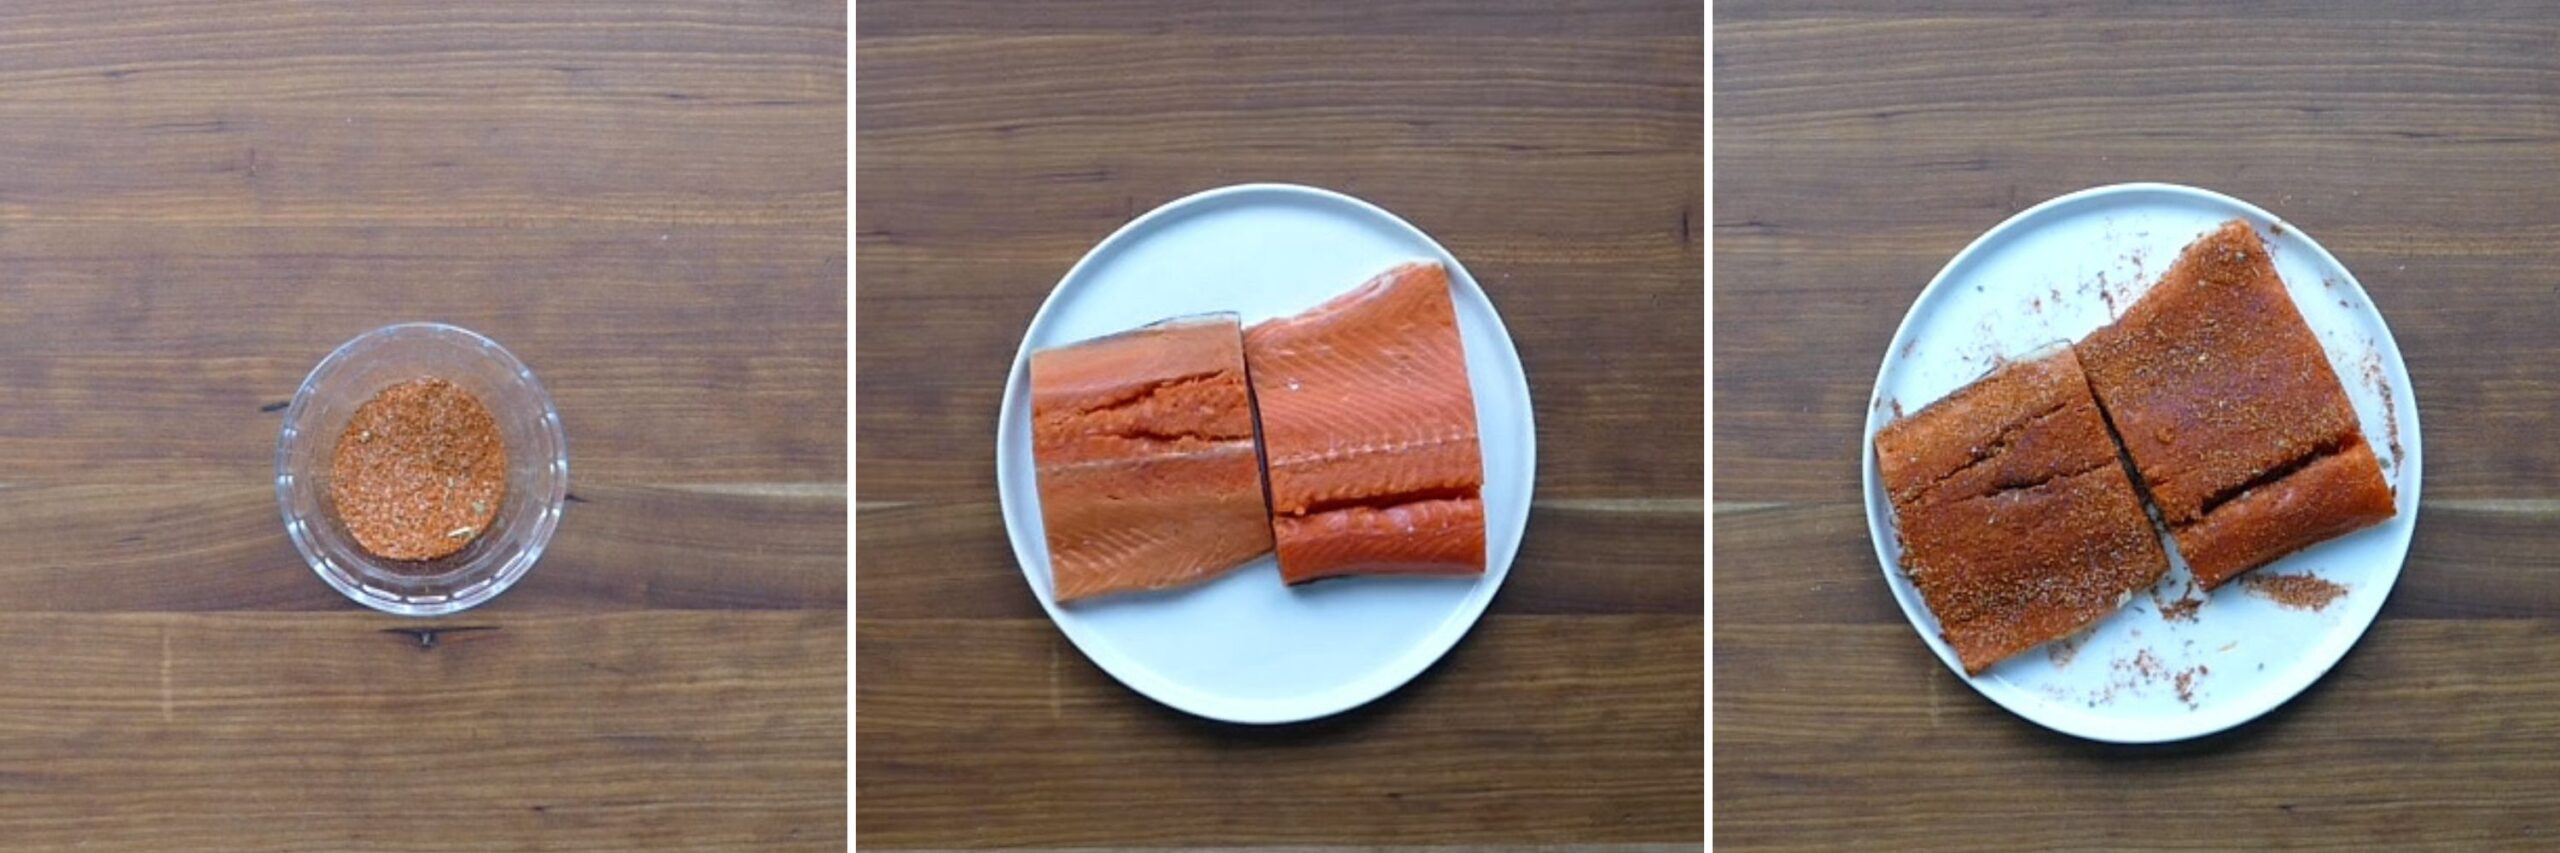 air fryer salmon instruction collage - spices in bowl, salmon on plate, salmon with spice